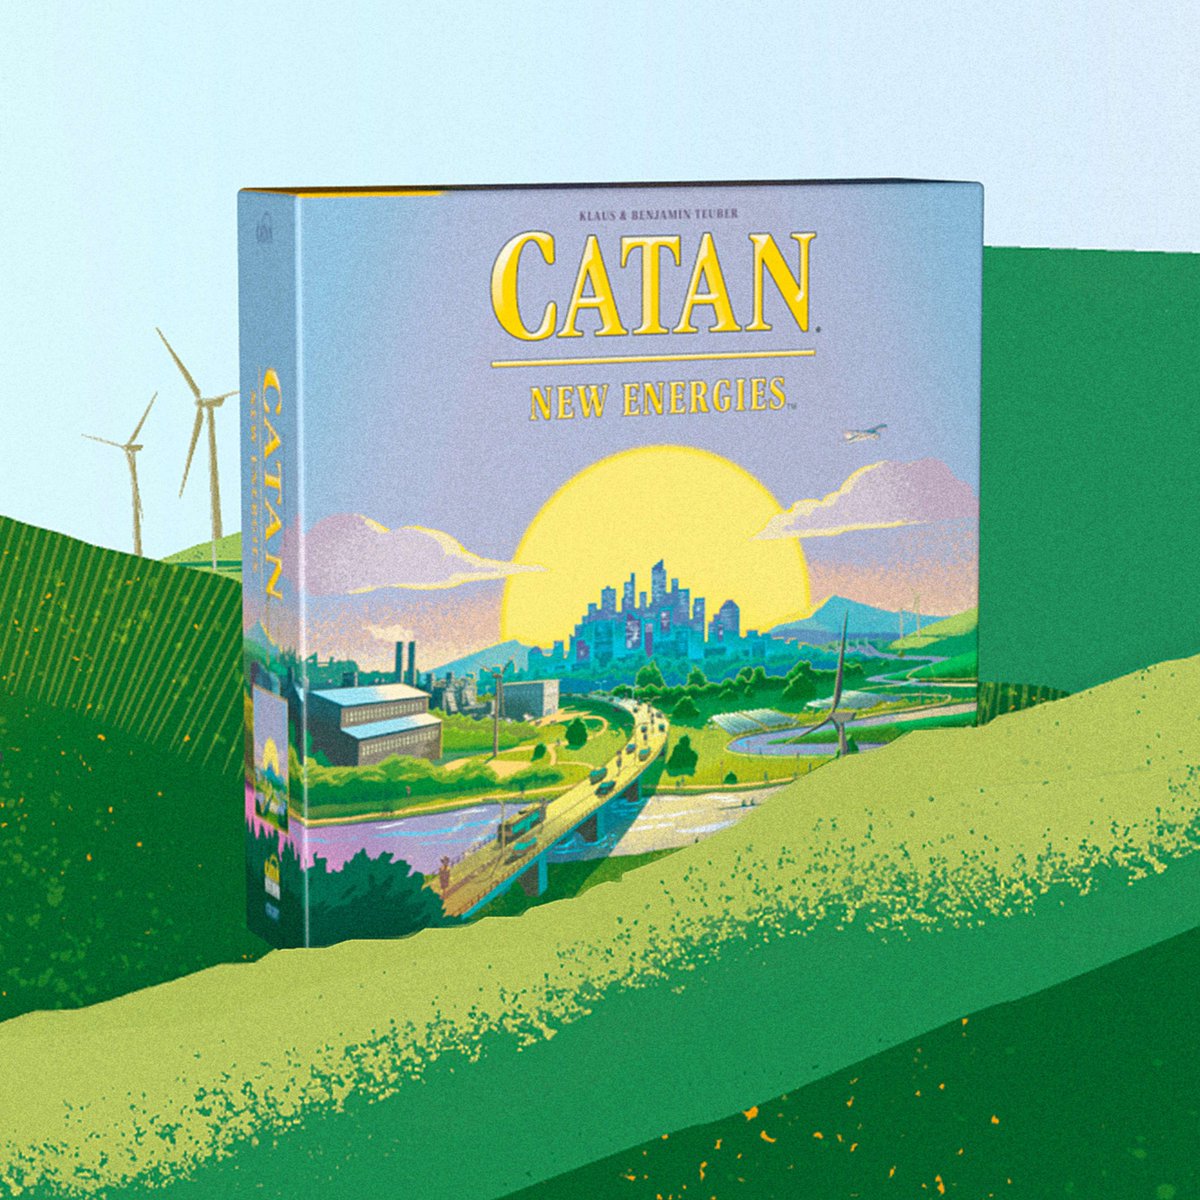 'The outcome of this game won’t change the world. But maybe your way of thinking will, and you can later go and change the world' - a wonderful quote from designer Benjamin Teuber 👉 bit.ly/3U3AVGR #catan #settlersofcatan #newenergies #boardgame